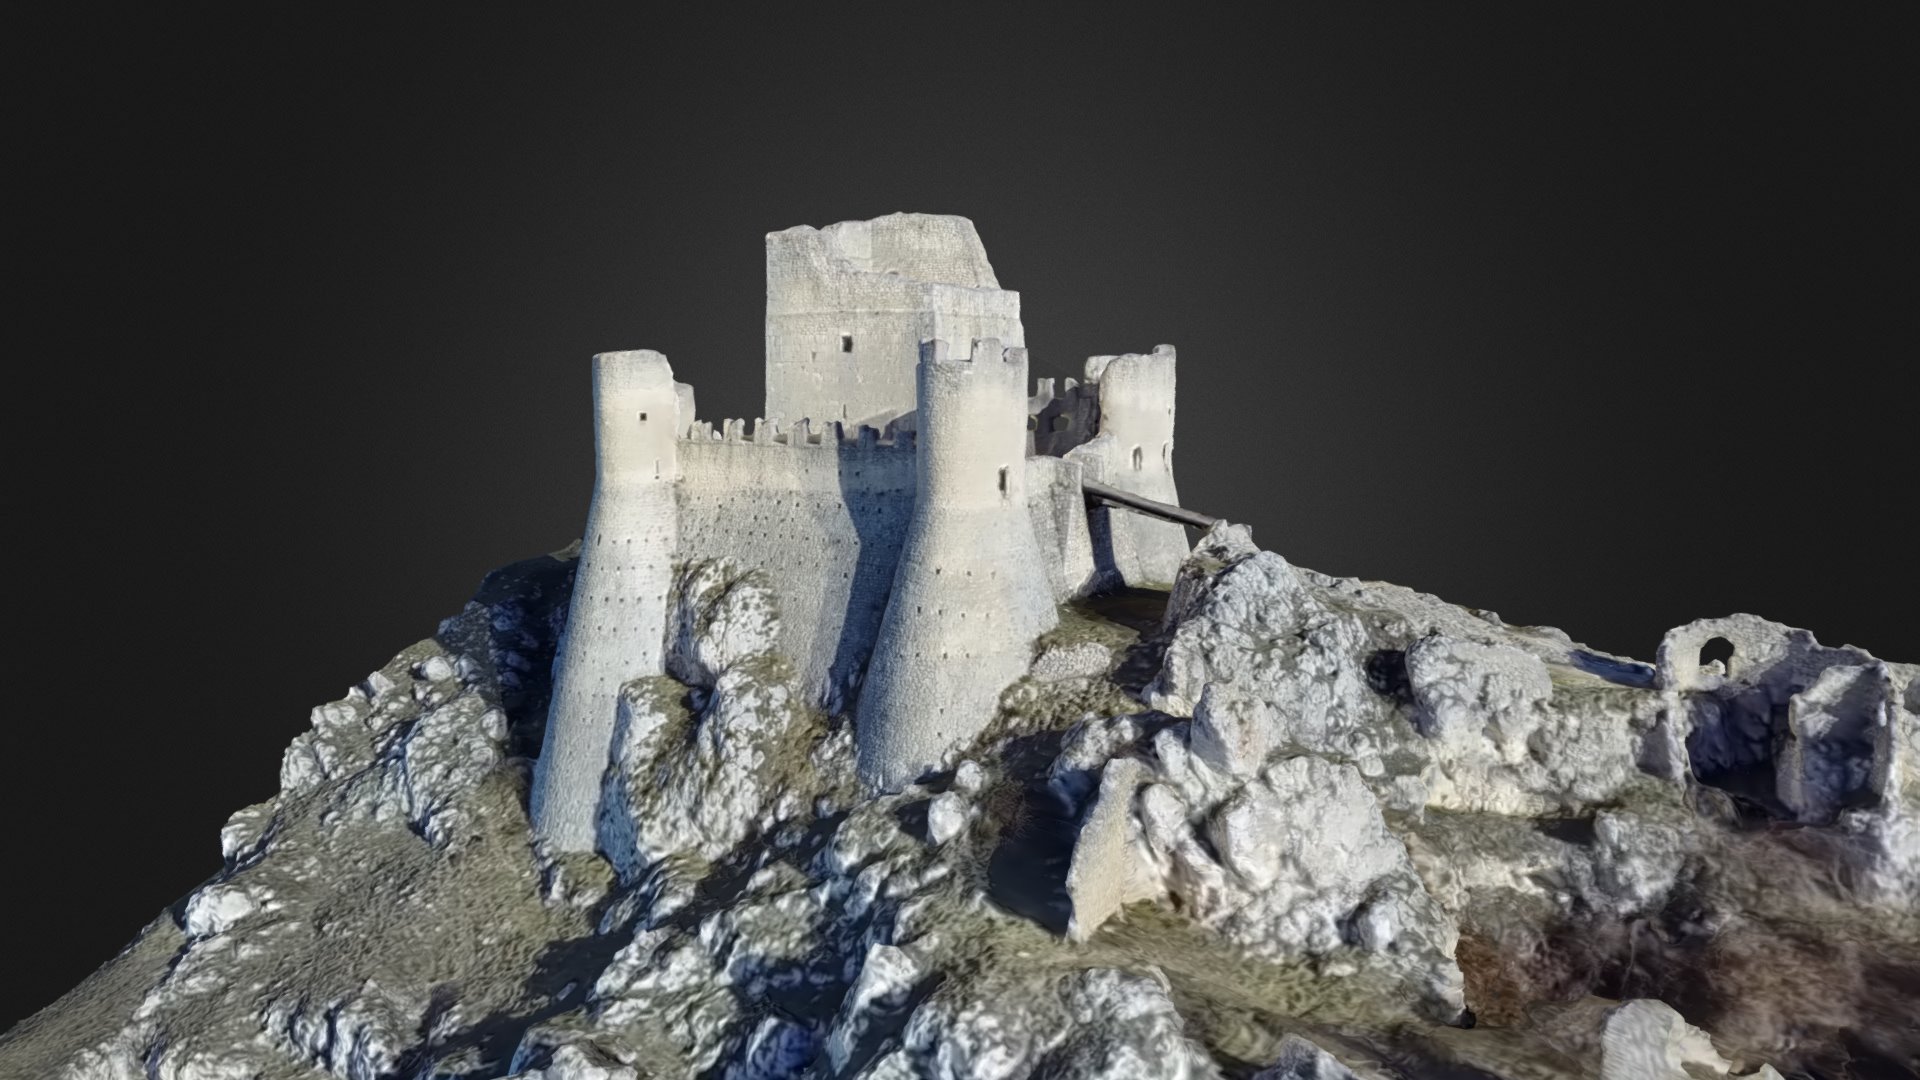 3D model Castle videogrammetry scan - This is a 3D model of the Castle videogrammetry scan. The 3D model is about a stone structure on top of a mountain.